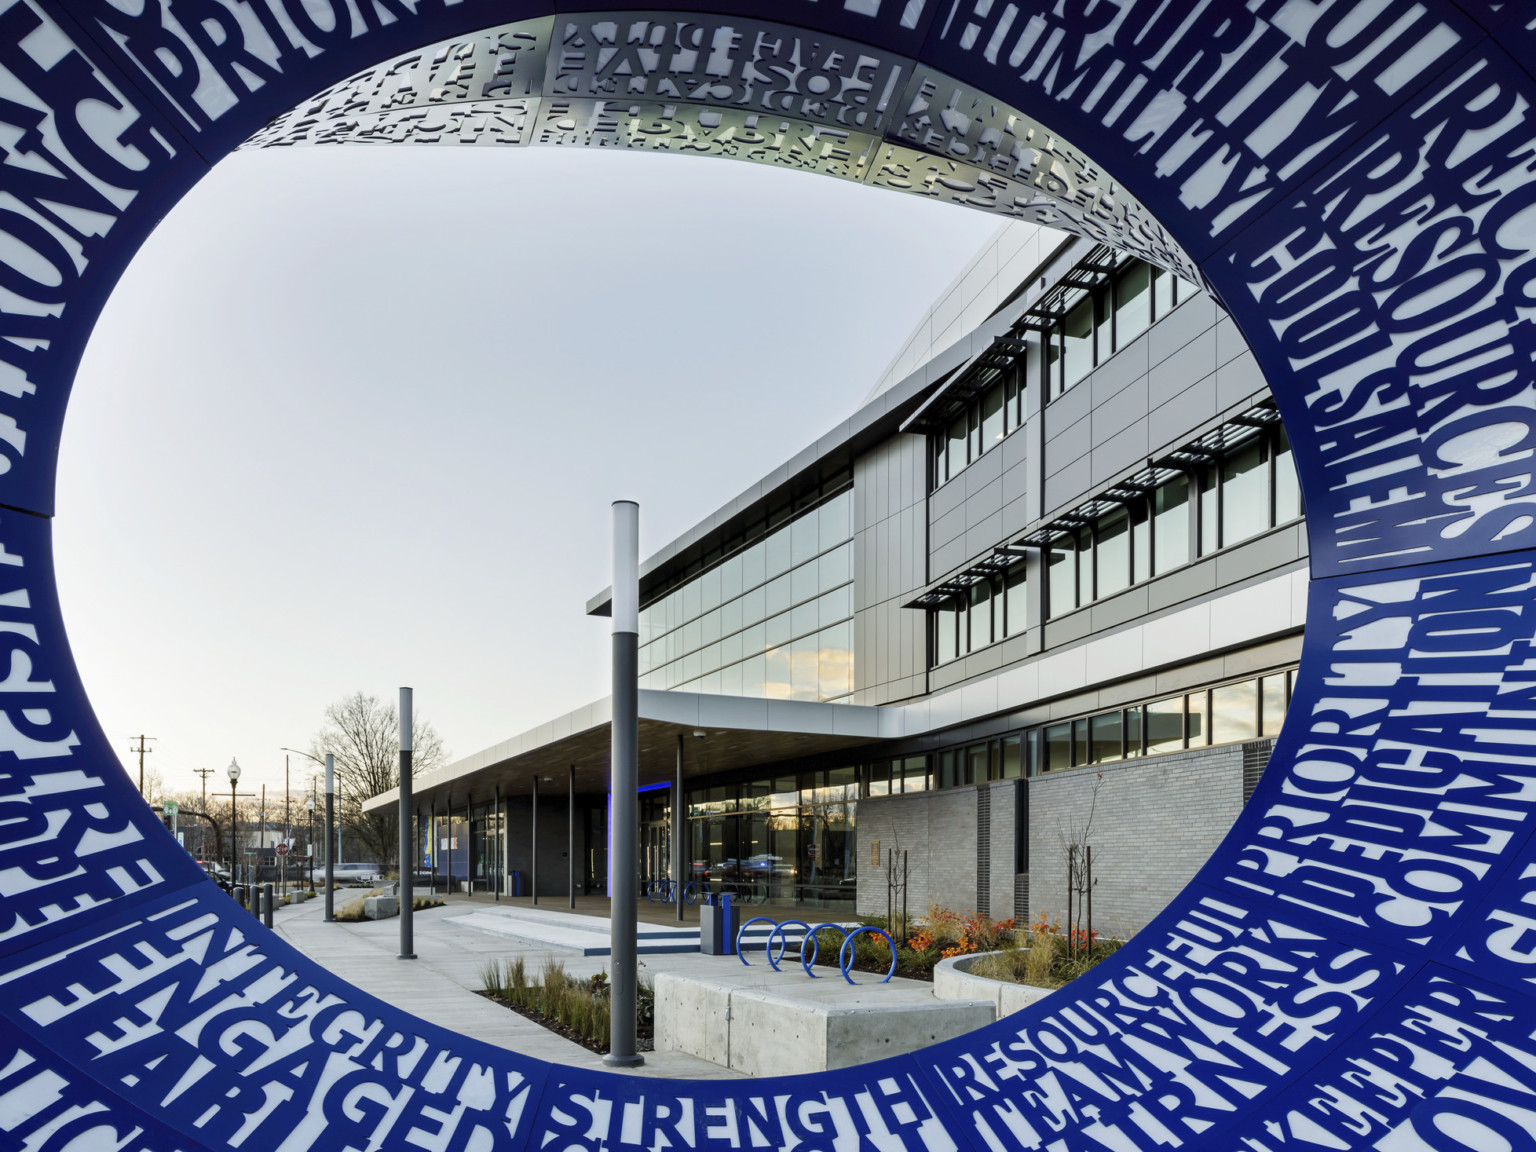 Close up of the sculpture showing different values written in blue around circle through which building entrance can be seen